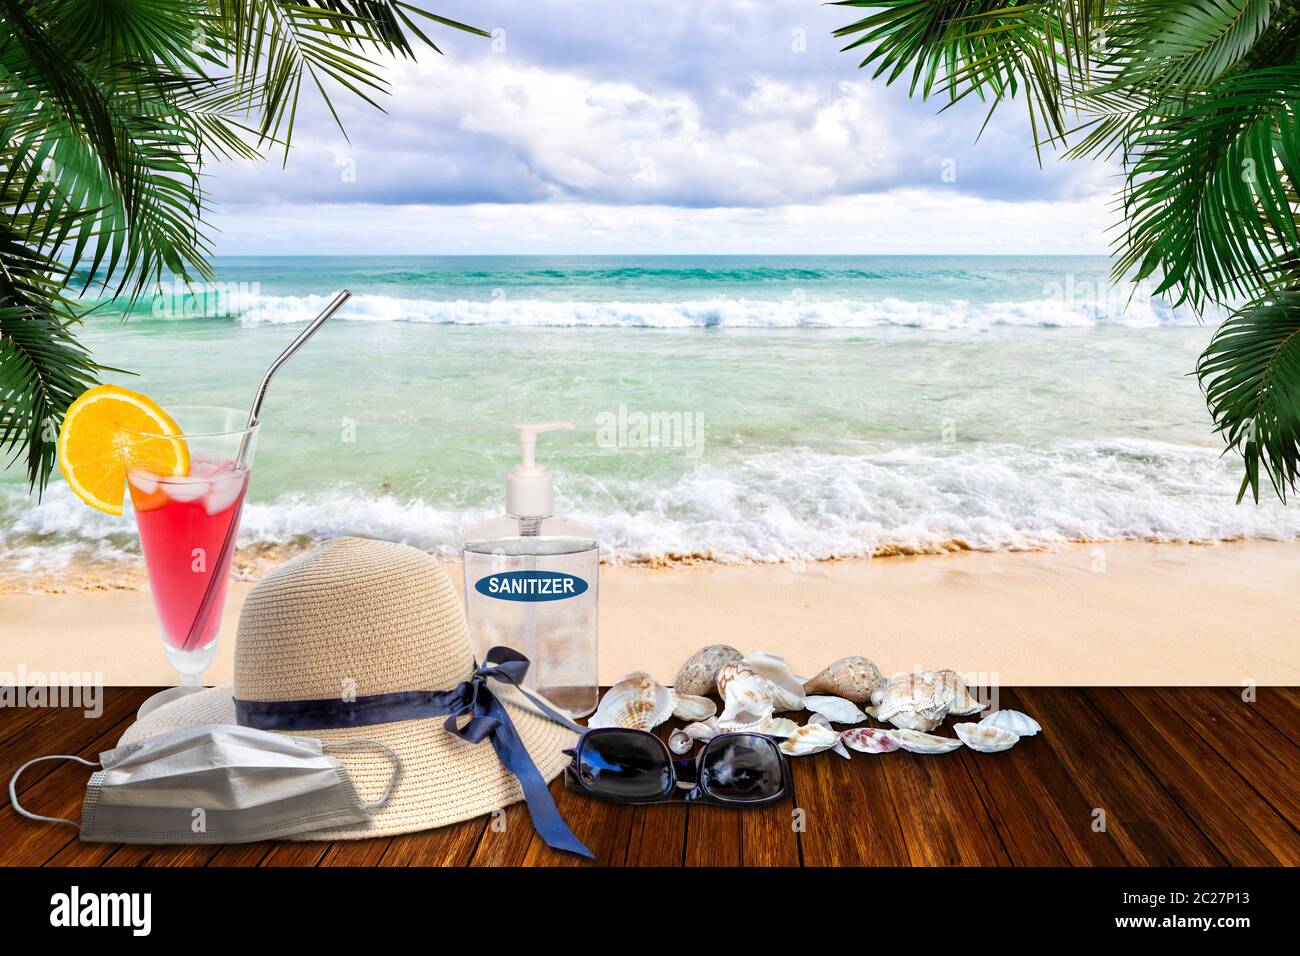 Vacationing in the New Normal after COVID-19 coronavirus pandemic. Tourism concept showing beach with hand sanitizer, medical face mask among beach ha Stock Photo